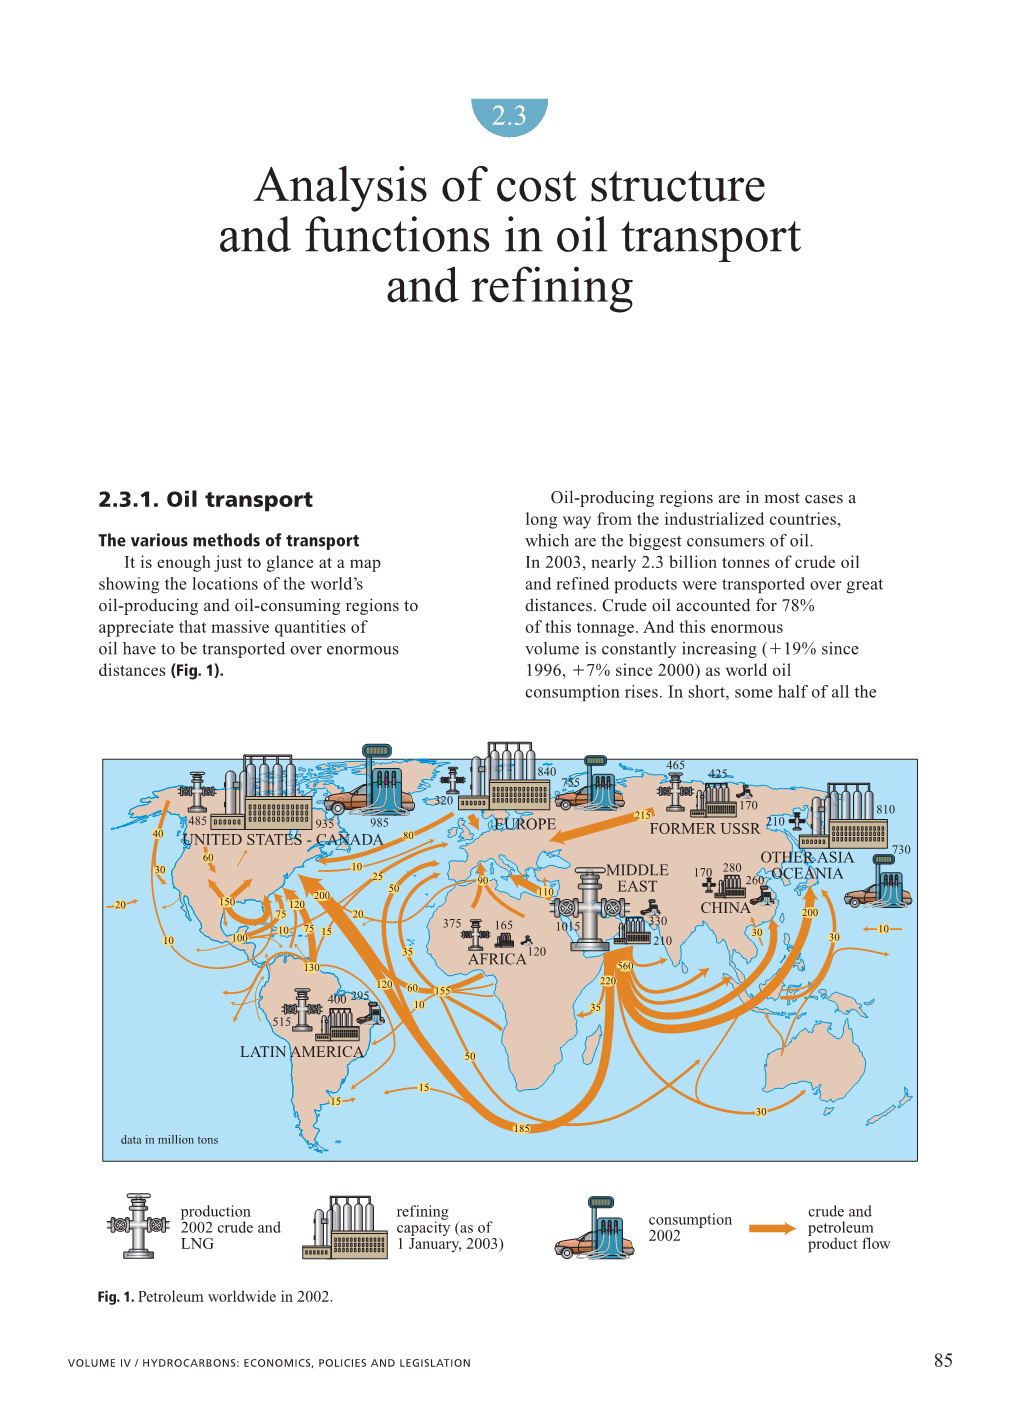 Analysis of Cost Structure and Functions in Oil Transport and Refining